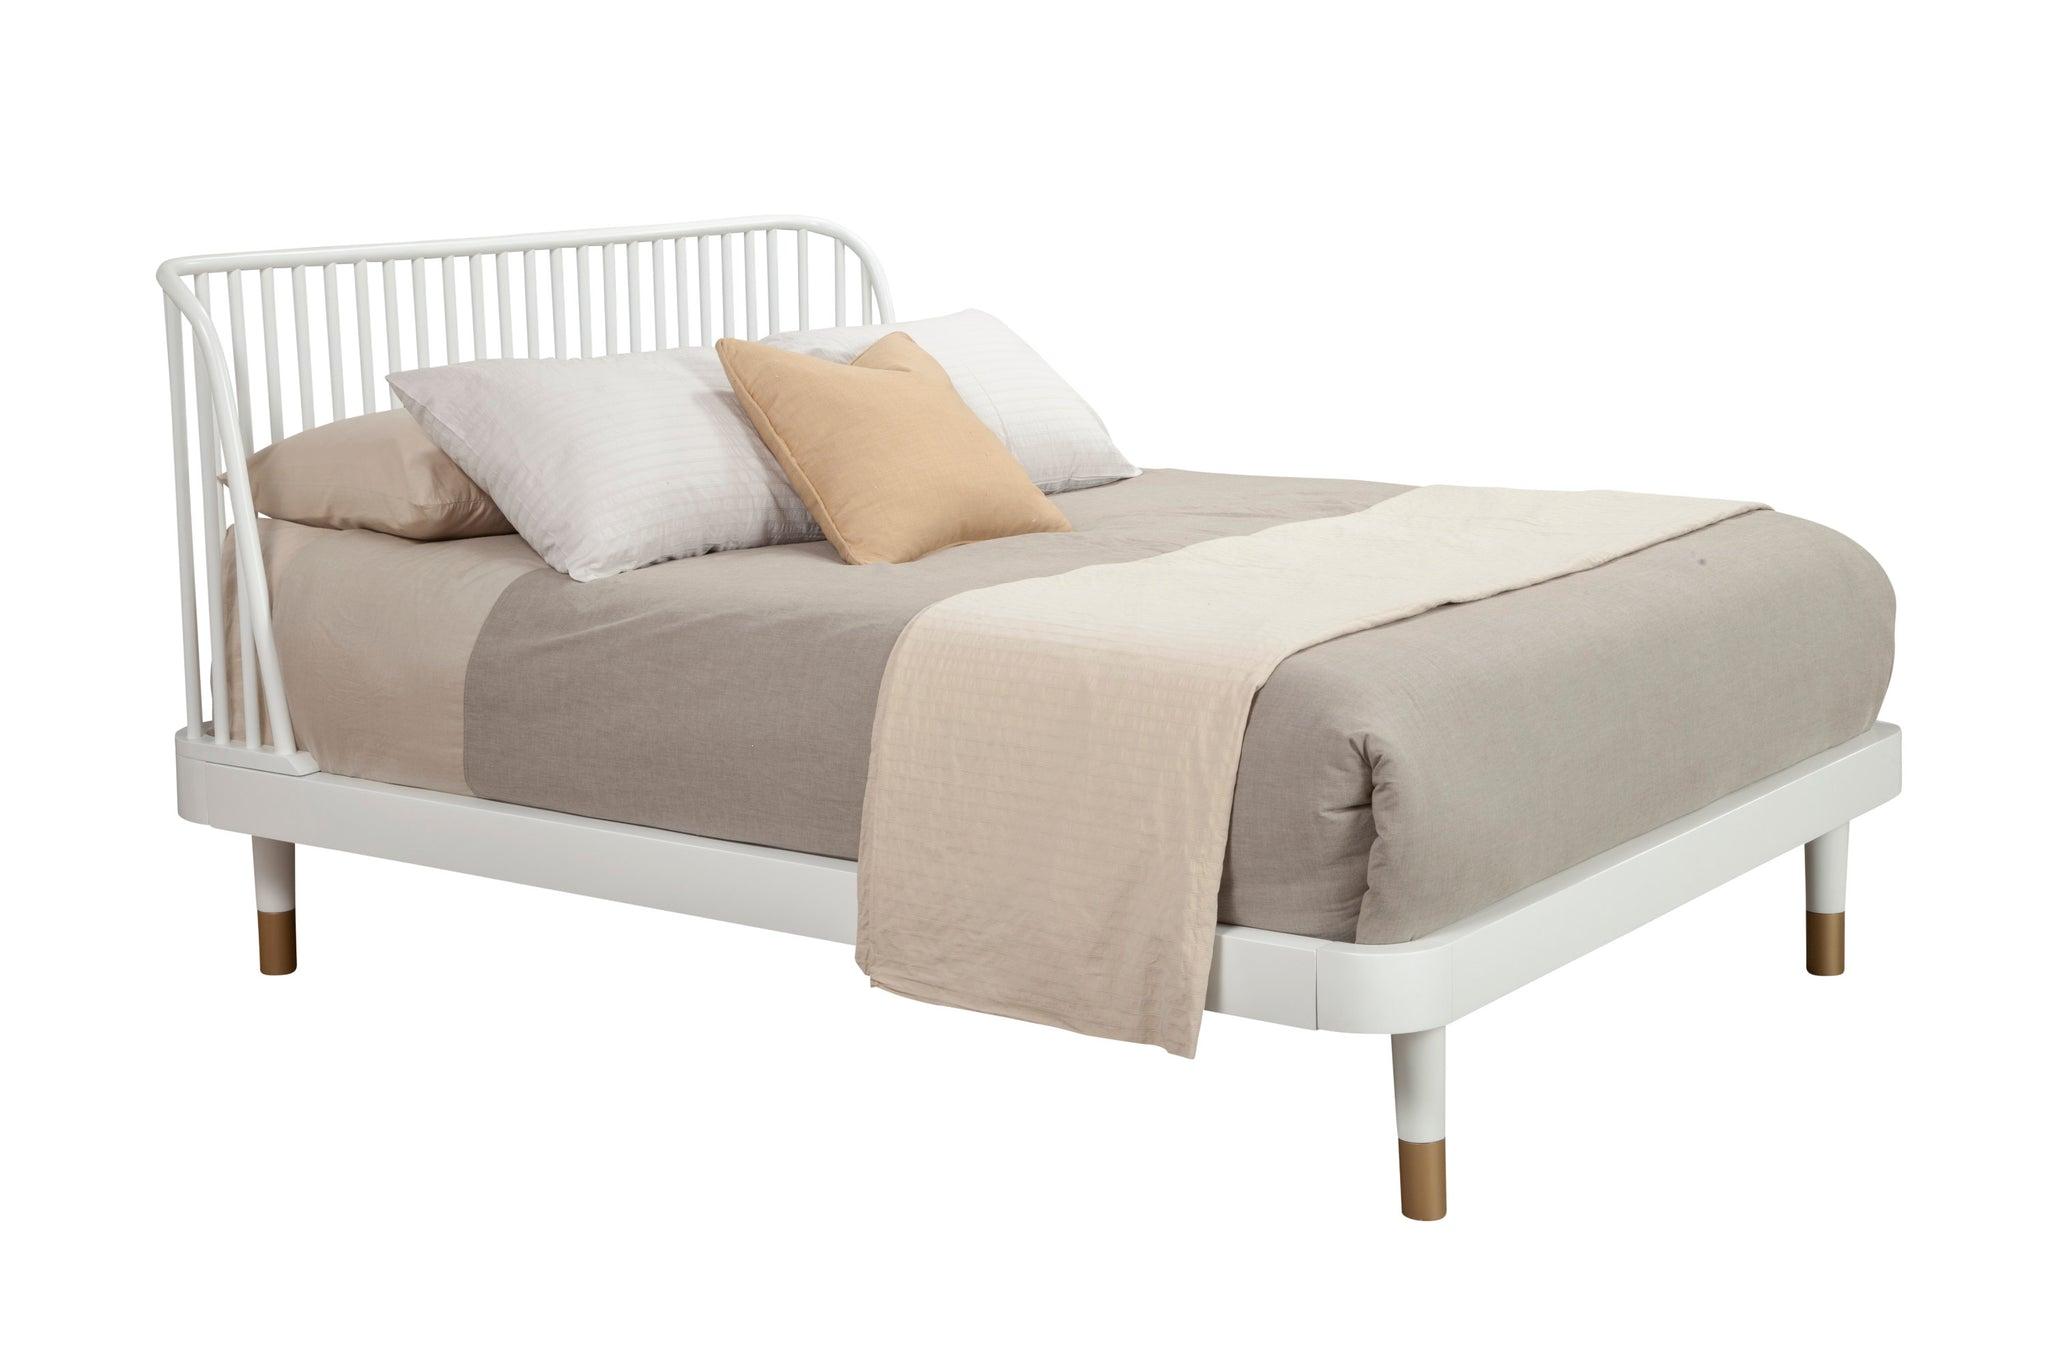 Contemporary Platform Bed MADELYN 2010-61Q in White 